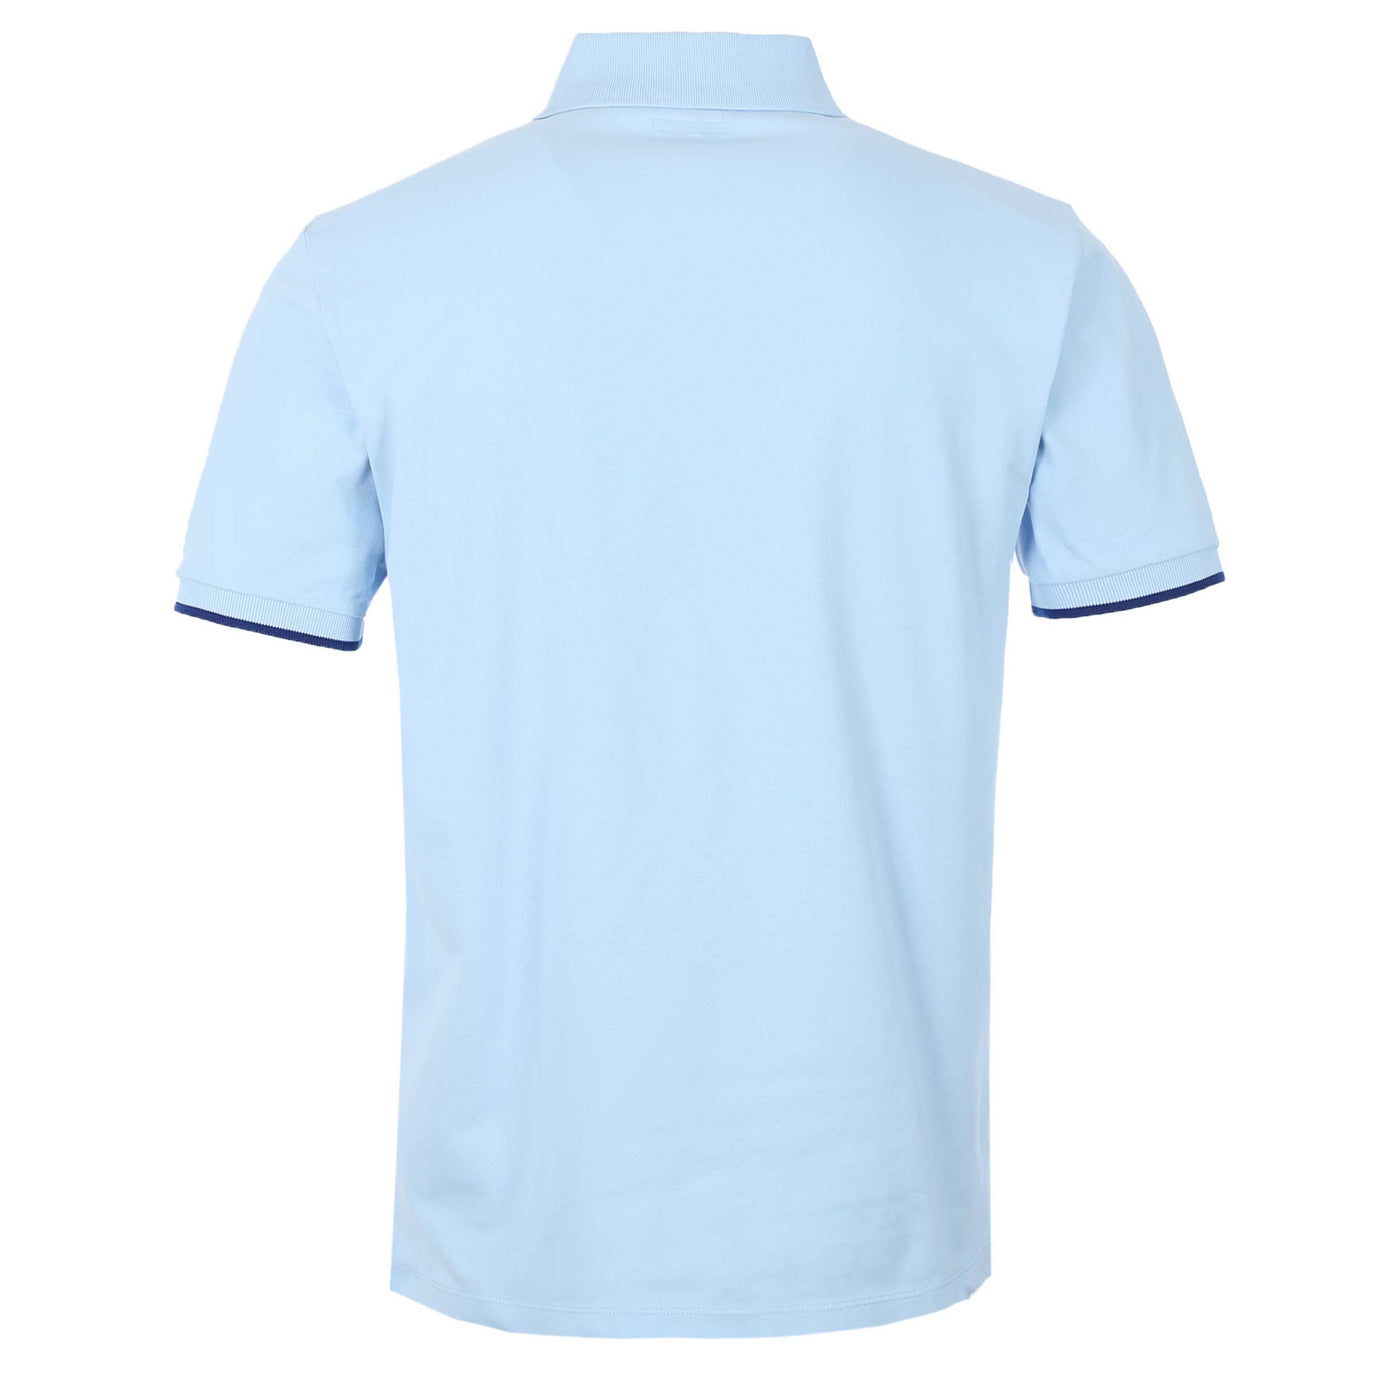 Jacob Cohen Tipped Polo Shirt in Sky Blue BackJacob Cohen Tipped Polo Shirt in Sky Blue Back